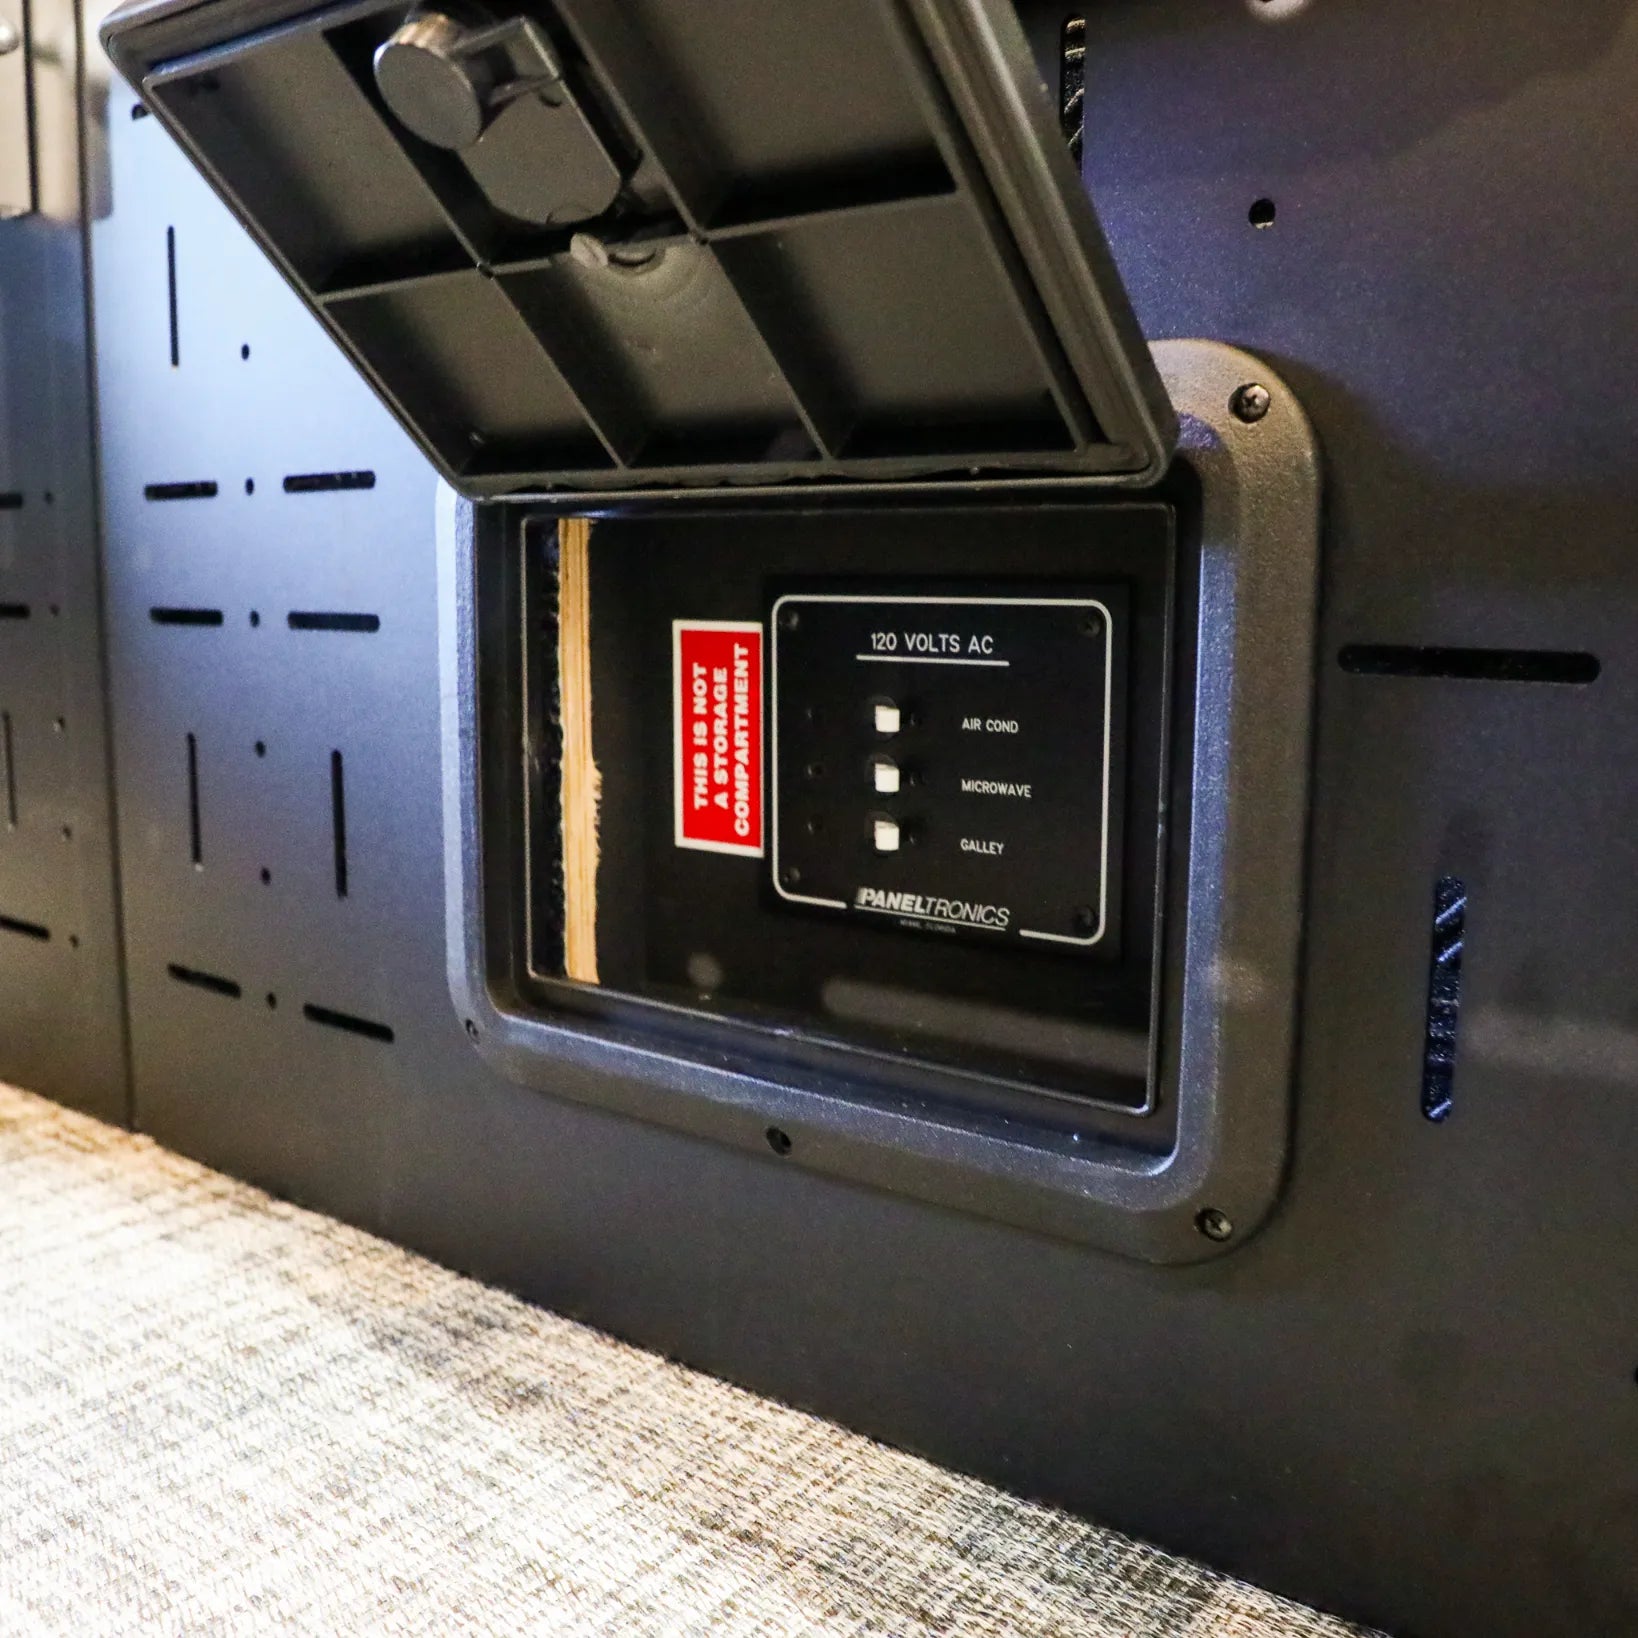 GSS™ Pro - Garage Storage System For The Storyteller Mode with Gear Wall / Seating